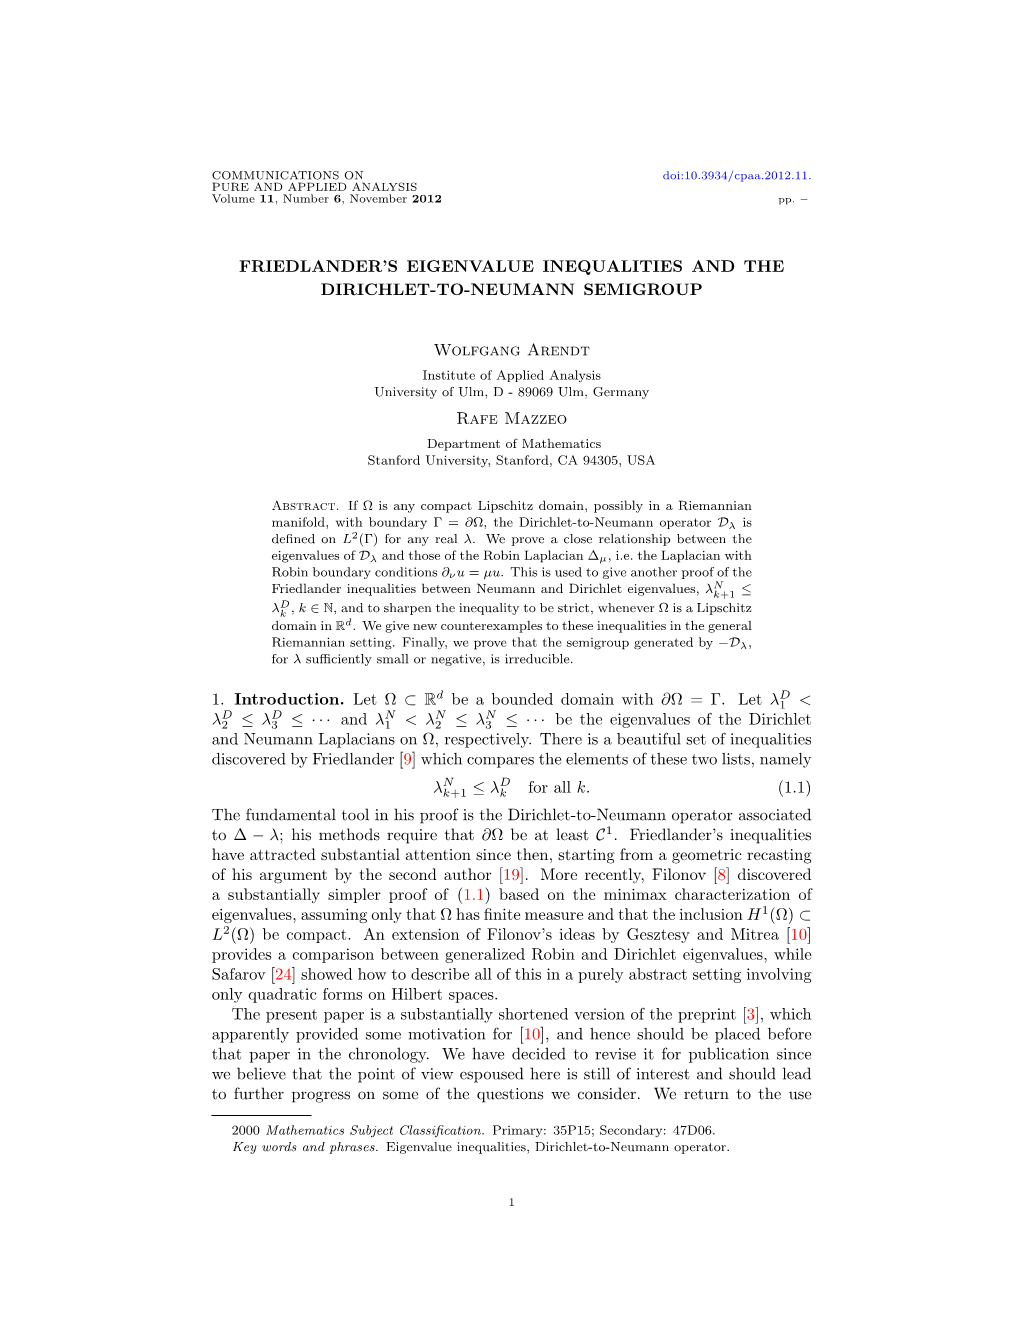 Friedlander's Eigenvalue Inequalities and The